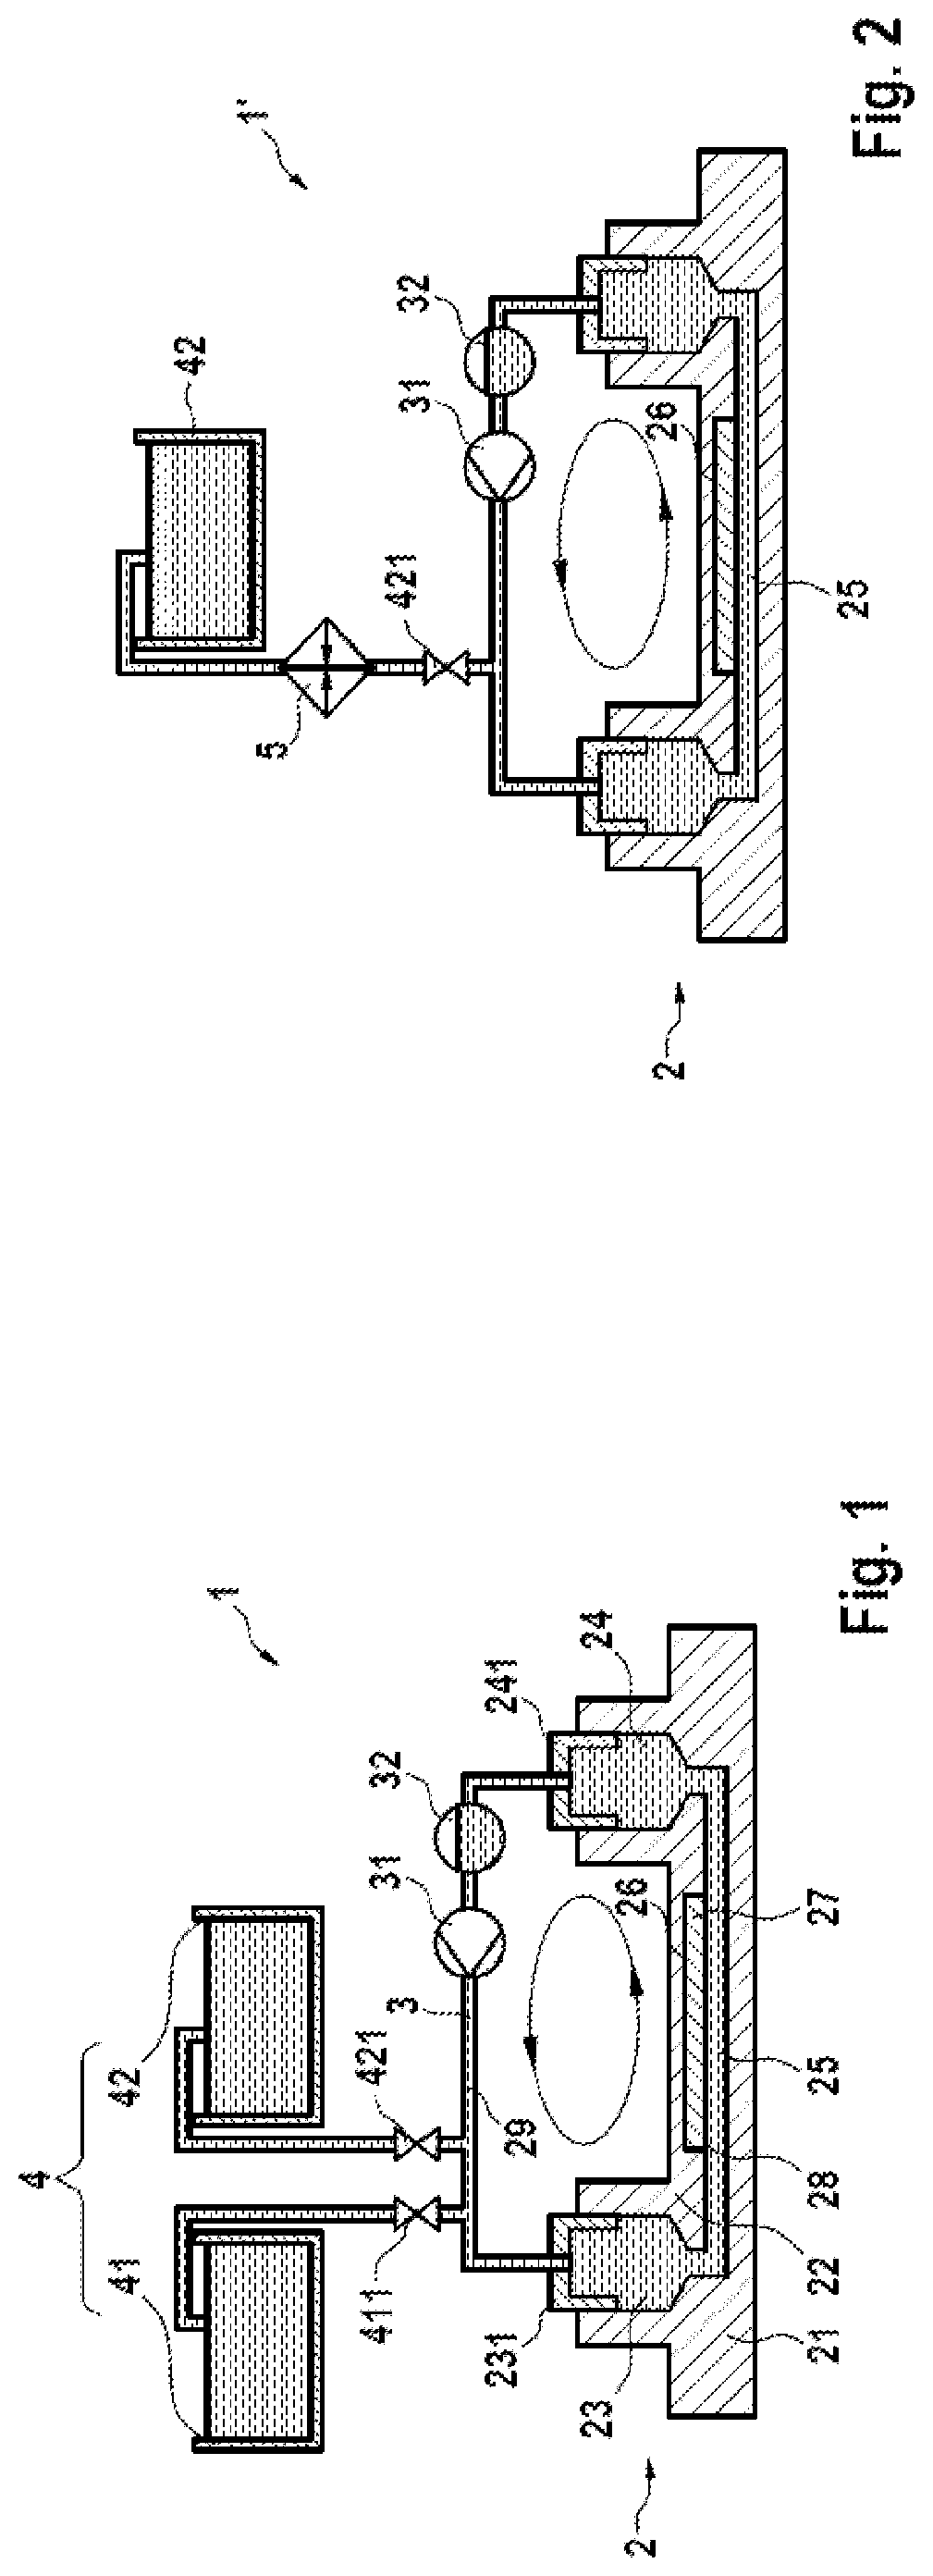 Microfluidic system for digital polymerase chain reaction of a biological sample, and respective method